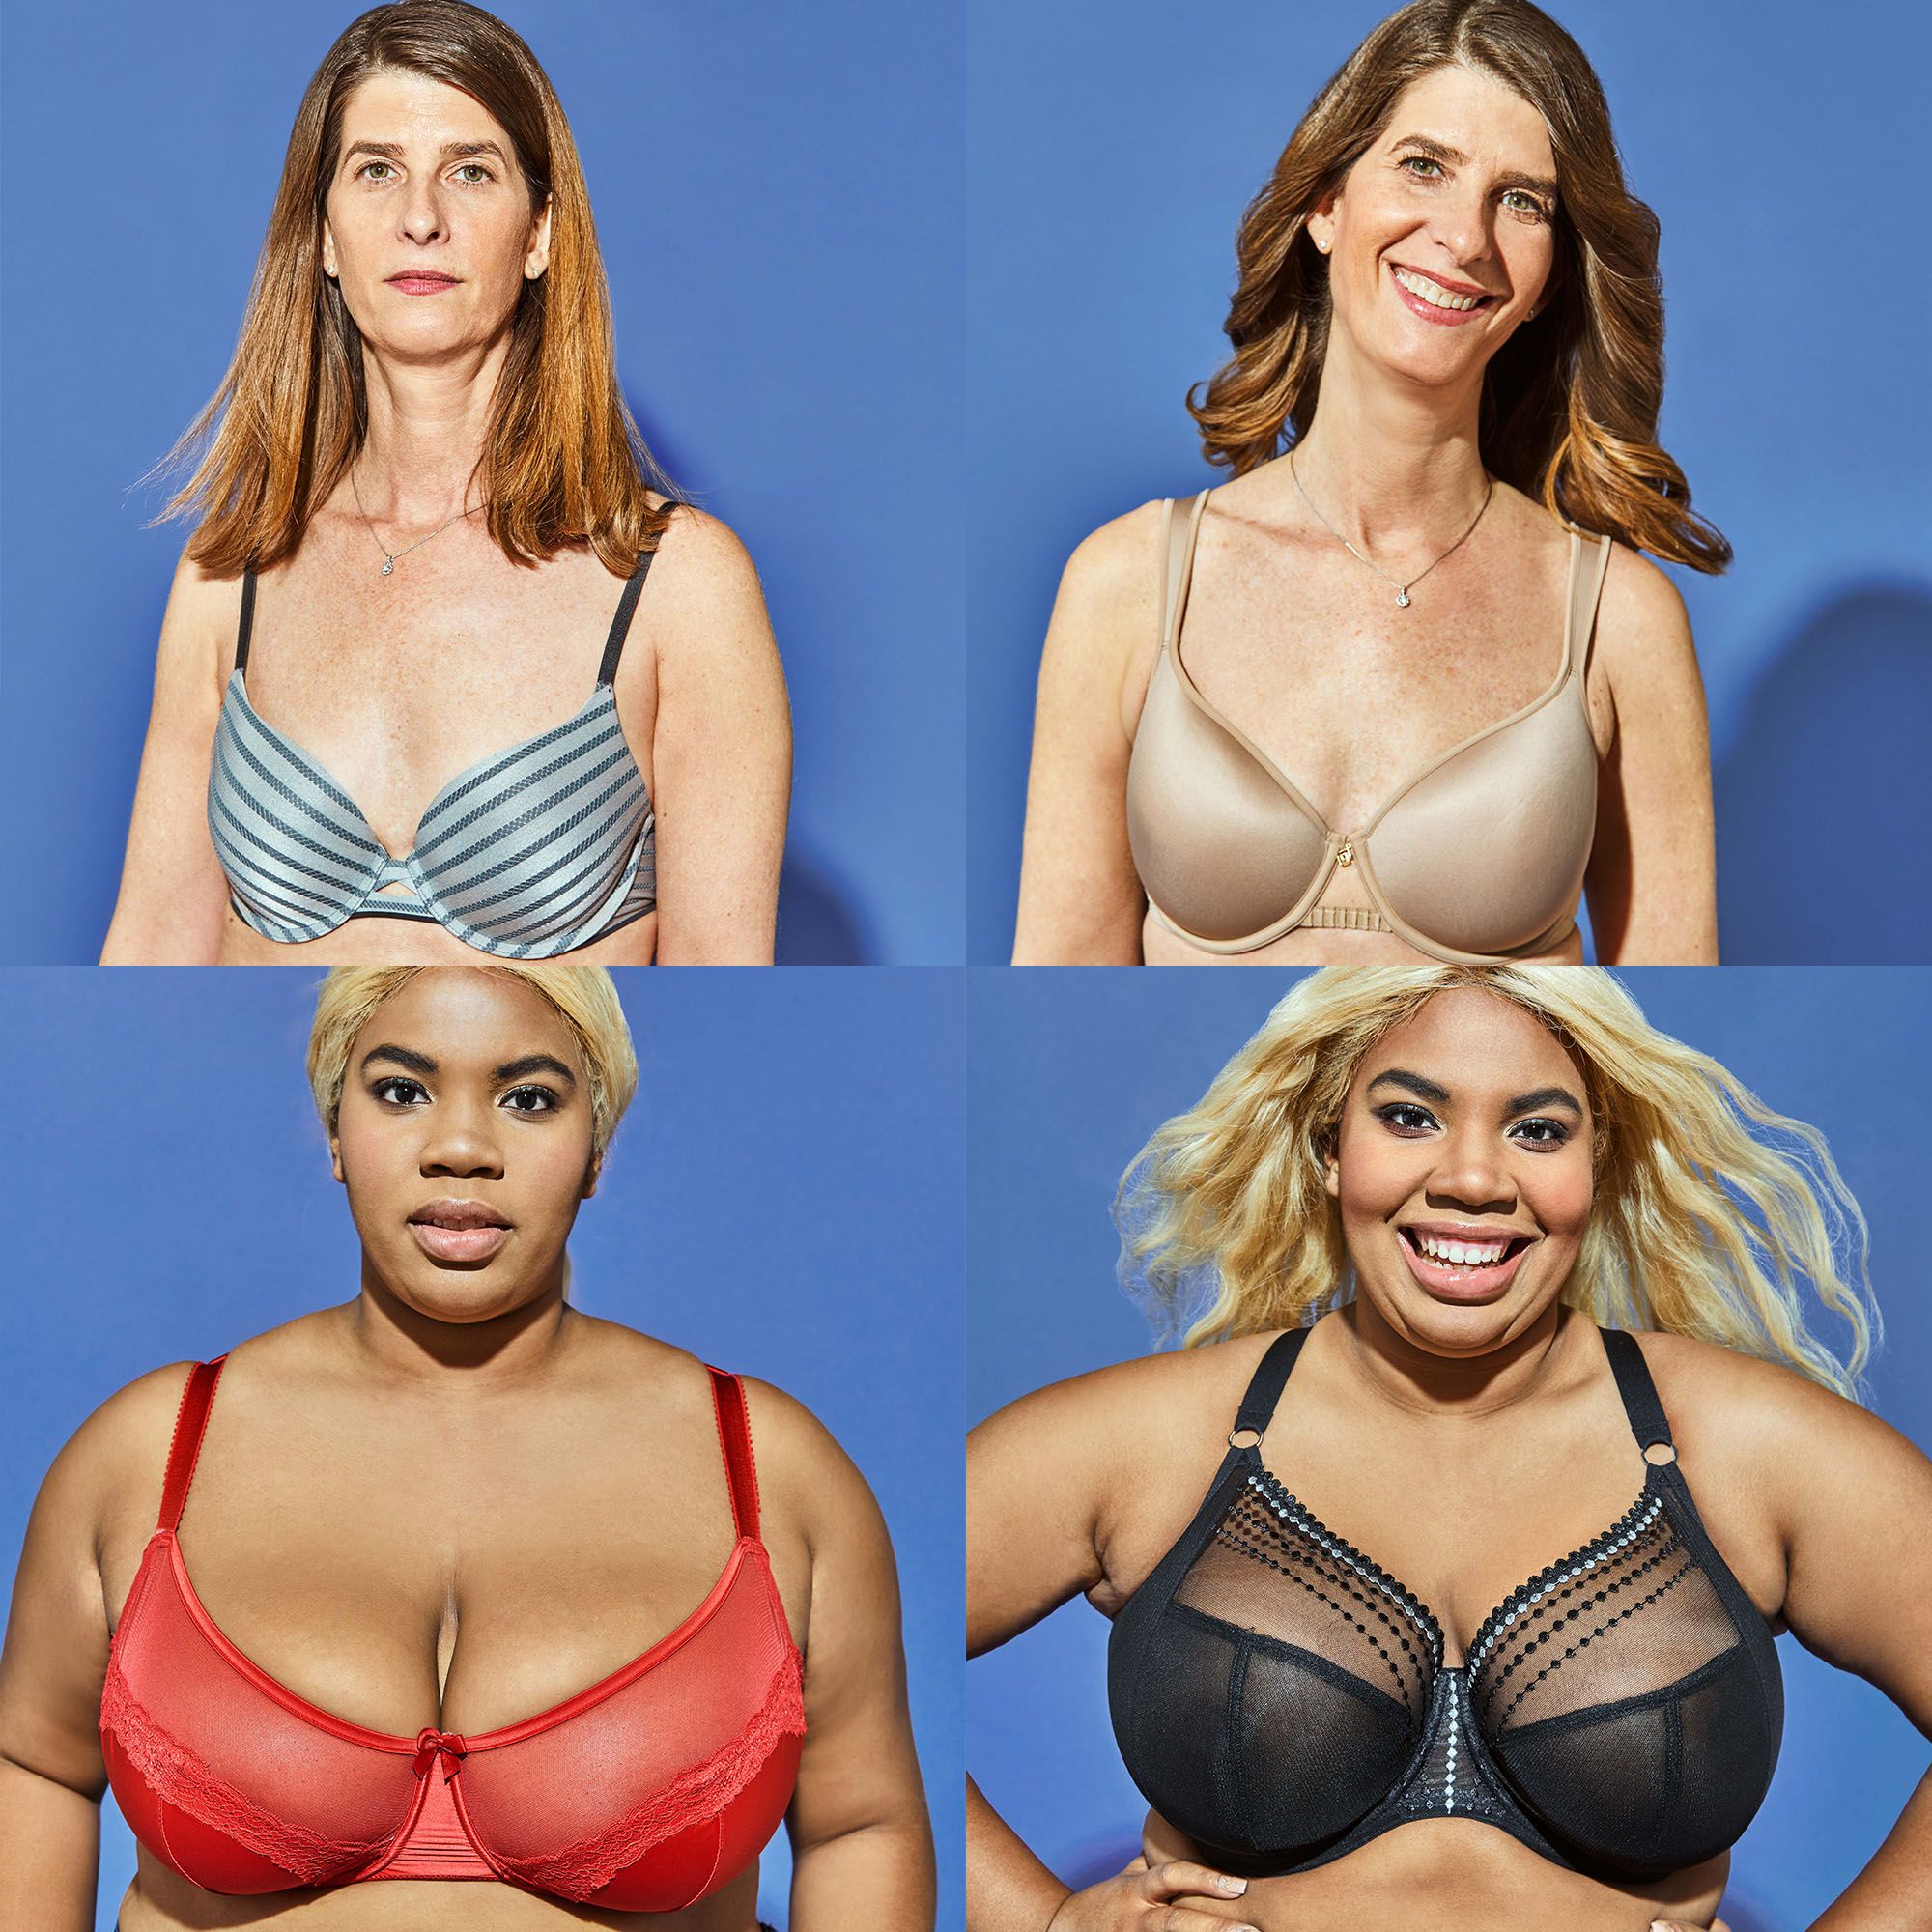 How to Measure Bra Size – 10 Real Women Find Their Perfect Fit